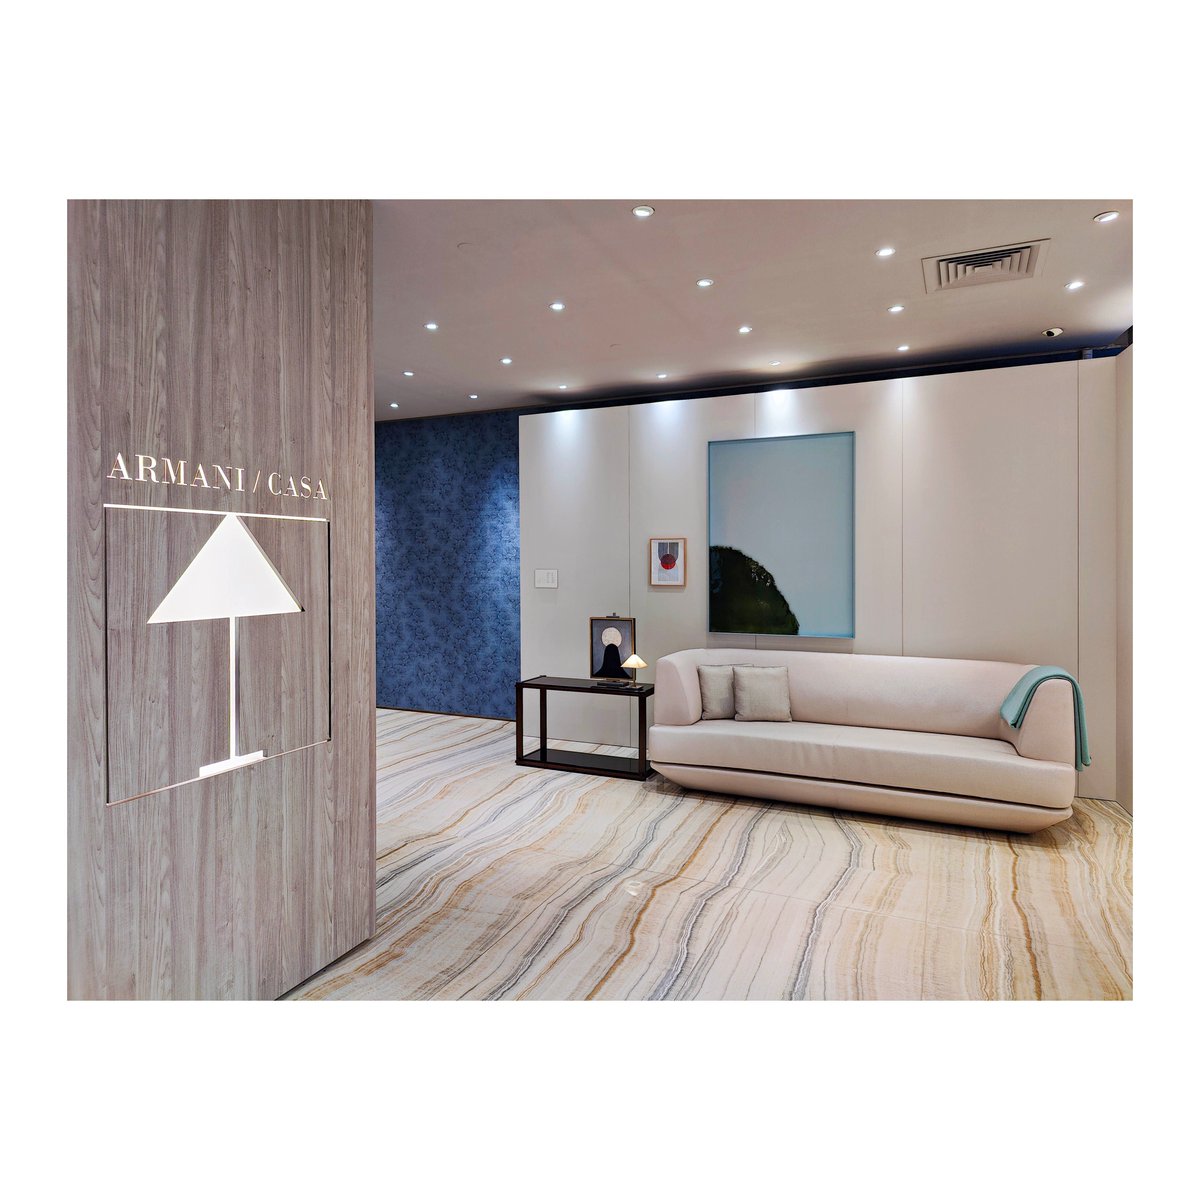 Installation of artworks for Armani / Casa in Paris for Paris Design Week 2023. Styled by Nick Vinson.

@nickvinson
@giorgioarmani 
#ArmaniCasa 

#interiordesign #homeinspiration #townhouse #luxuryproperty #homeinterior  #interiorstyling #interiorsinspo #interiorinspirations